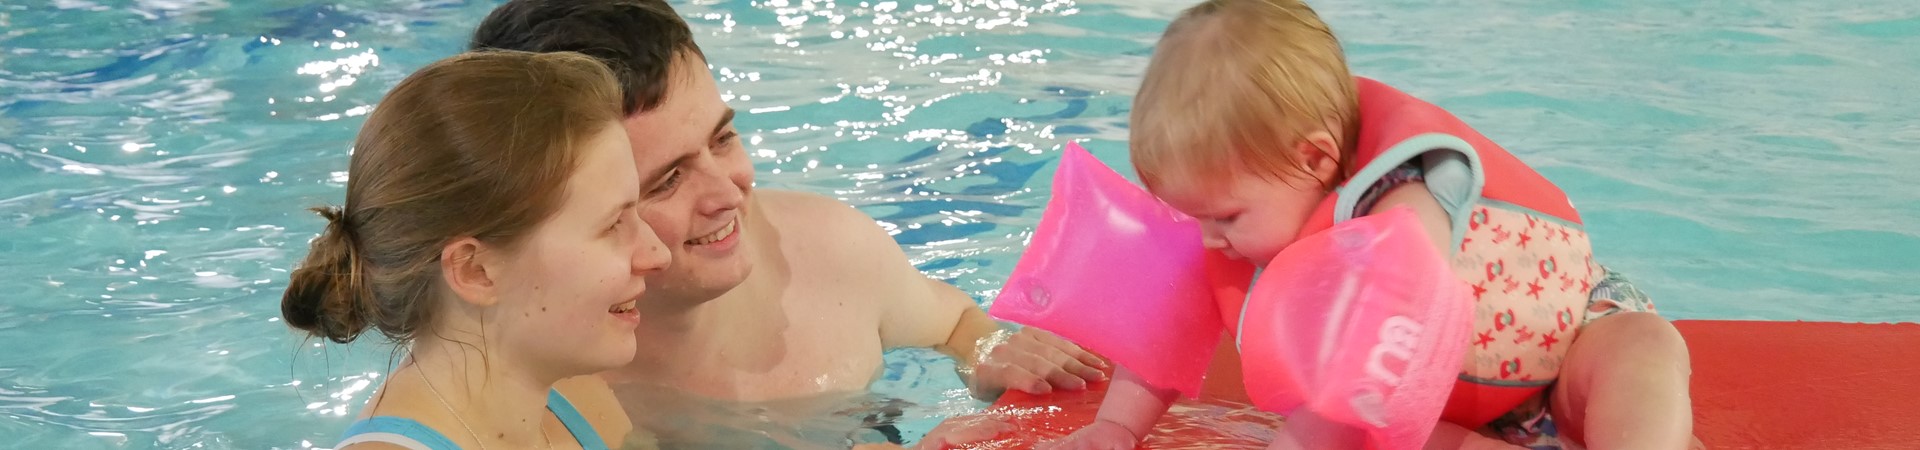 toddler swimming with parents